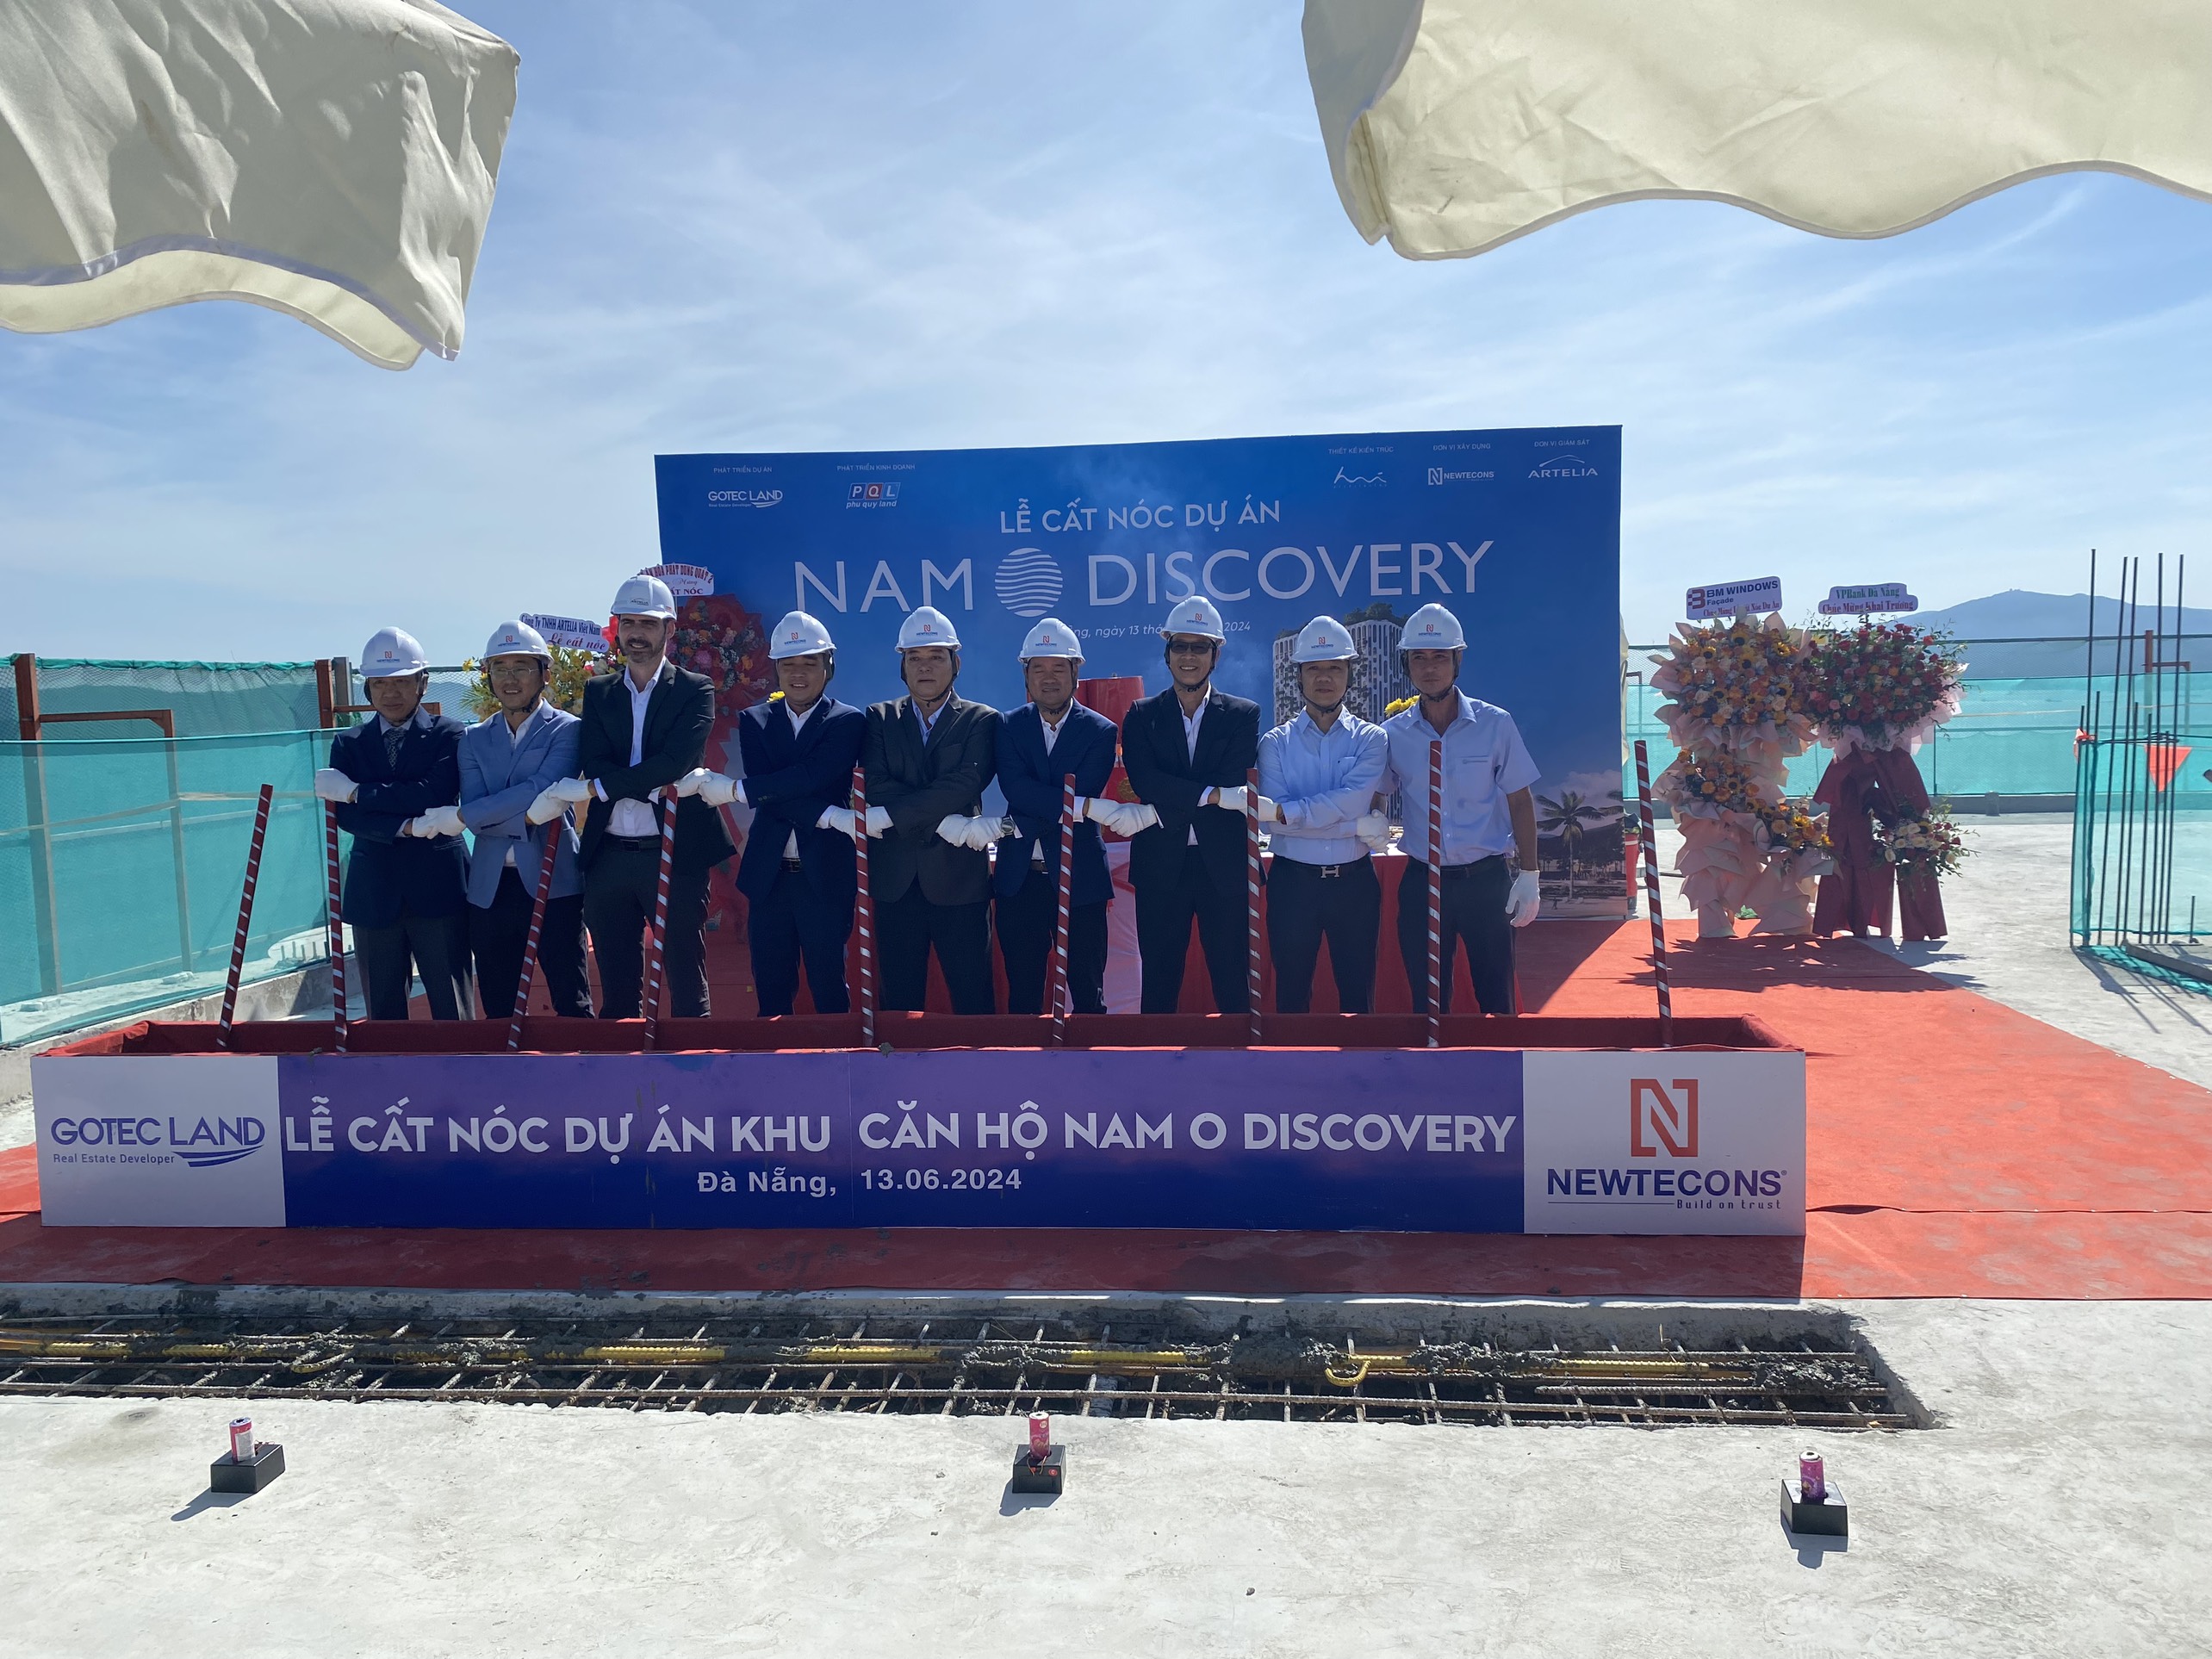 TOPPING OUT CEREMONY FOR “NAM O DISCOVERY” PROJECT